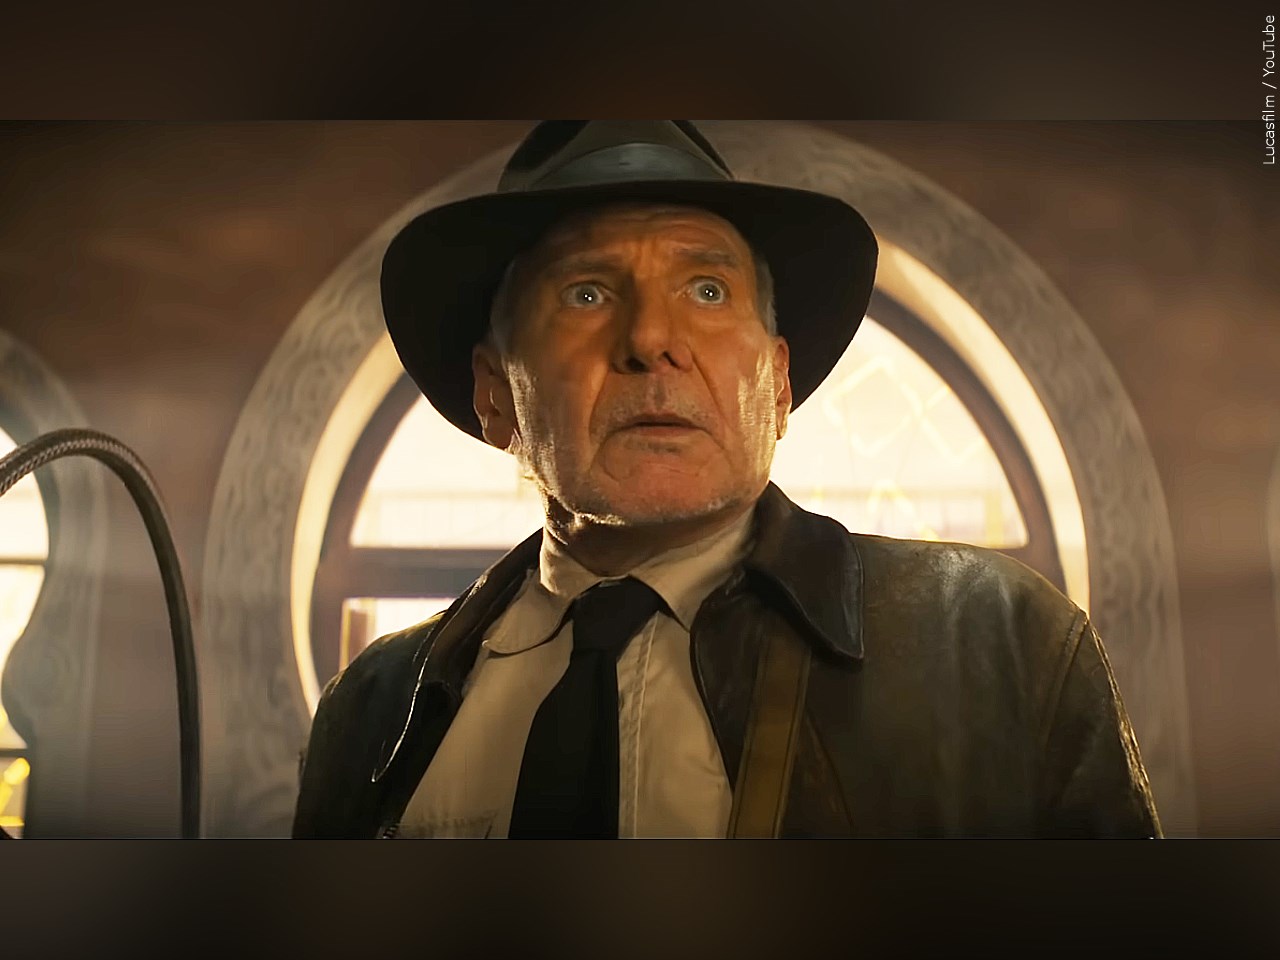 Indiana Jones looking caught off guard in front a window, wearing his trademark hat (Photo: Lucasfilm / YouTube)